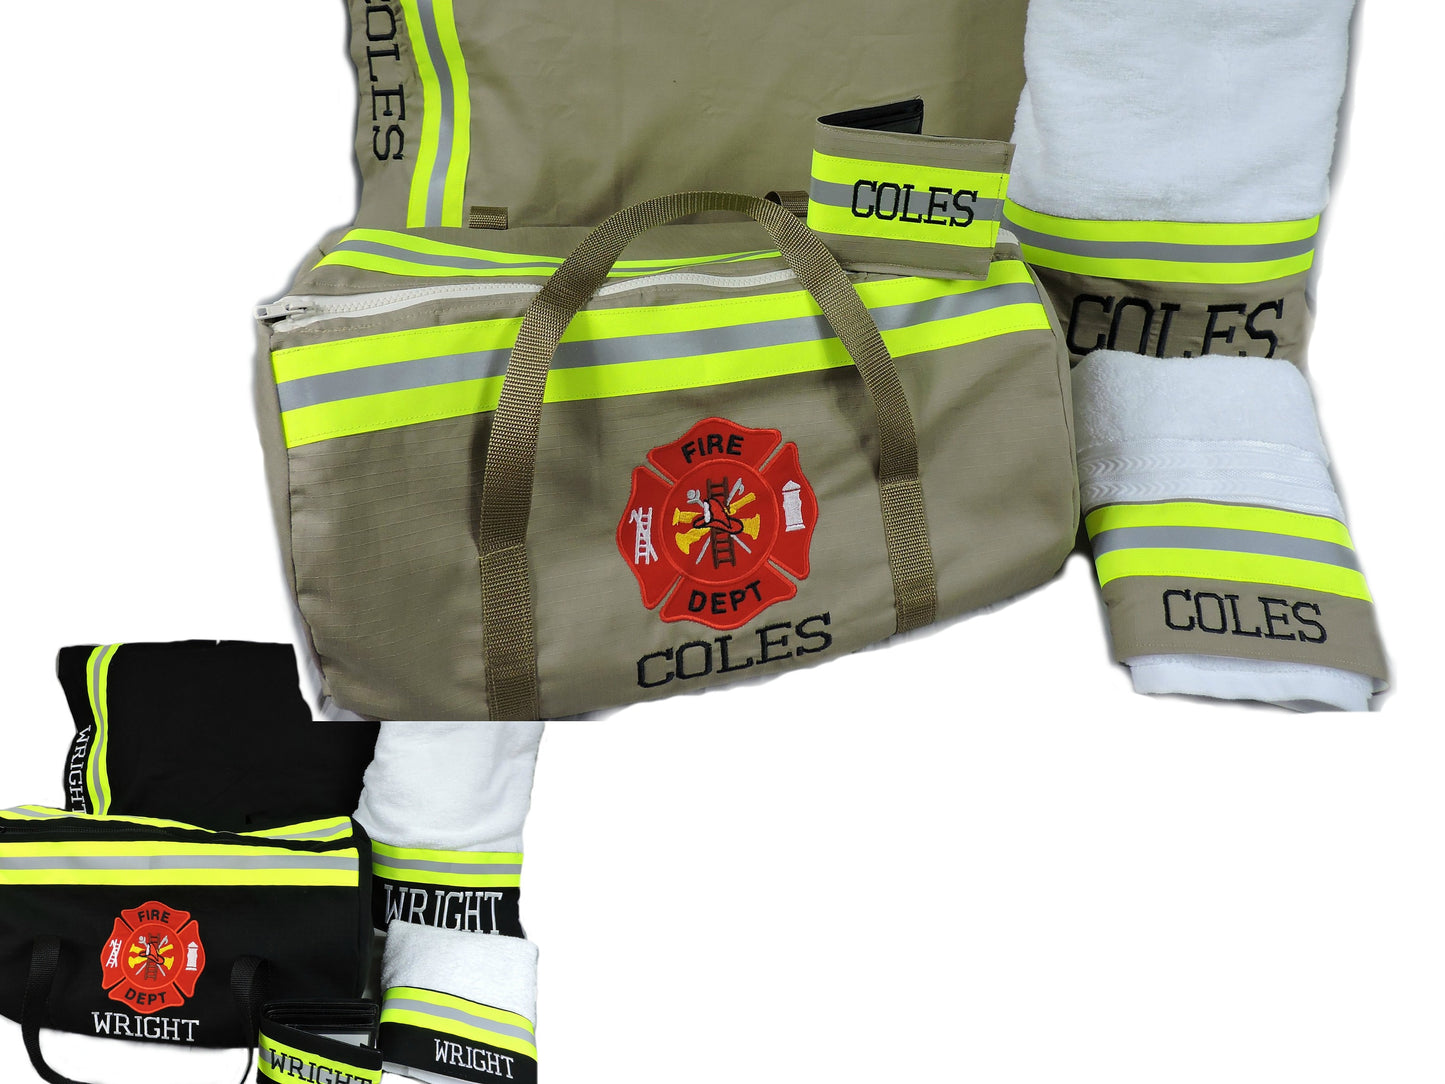 Firefighter Gift set with firefighter duffle bag, bath and hand towel, wallet and pillowcase